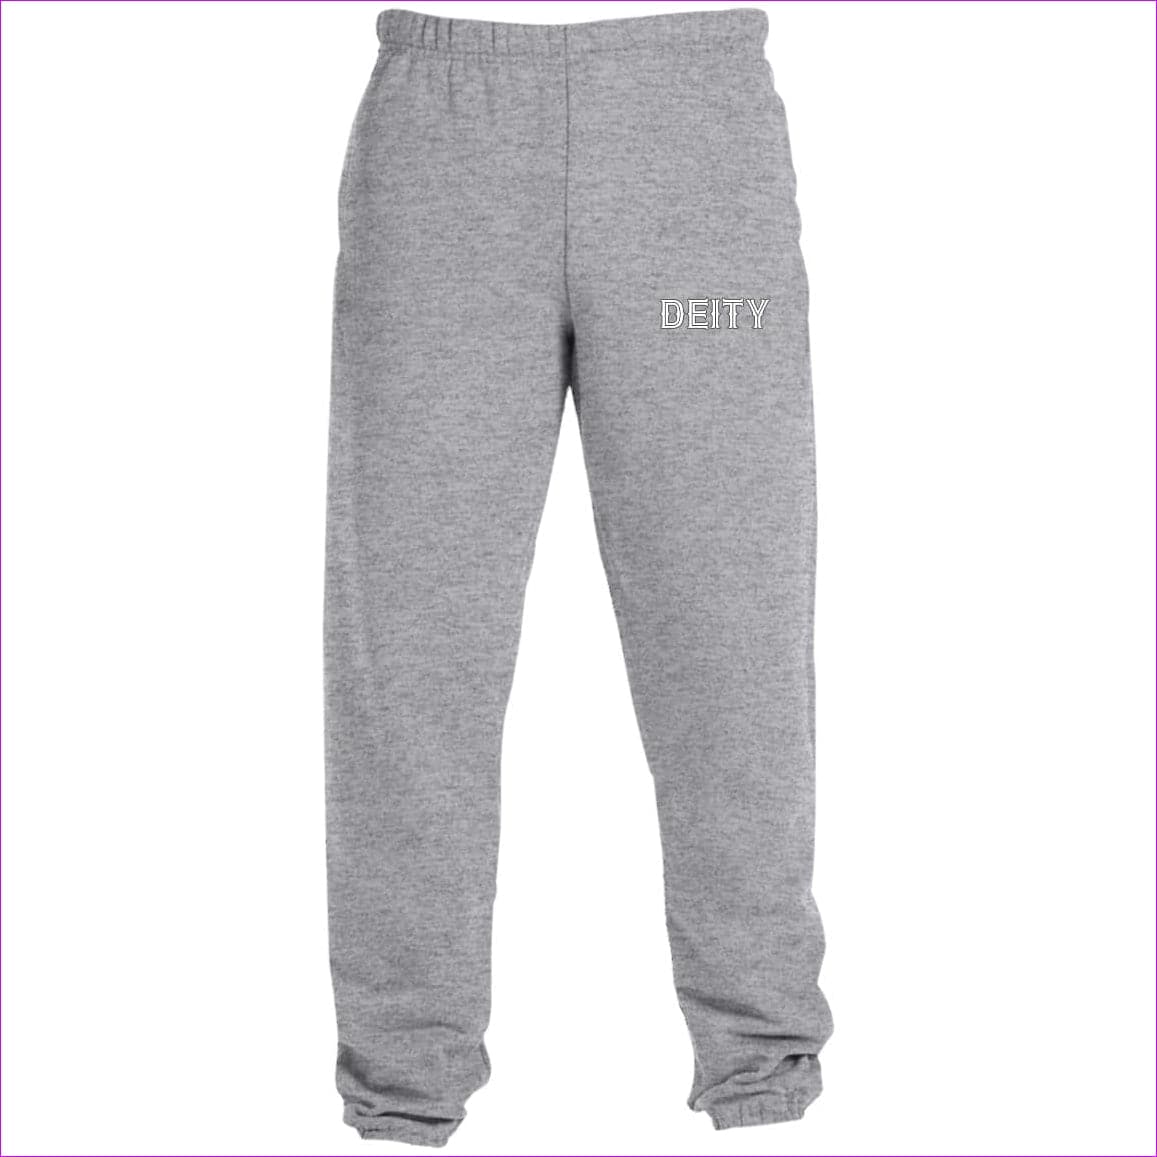 Oxford Grey - Deity Sweatpants with Pockets - unisex jogging pants at TFC&H Co.